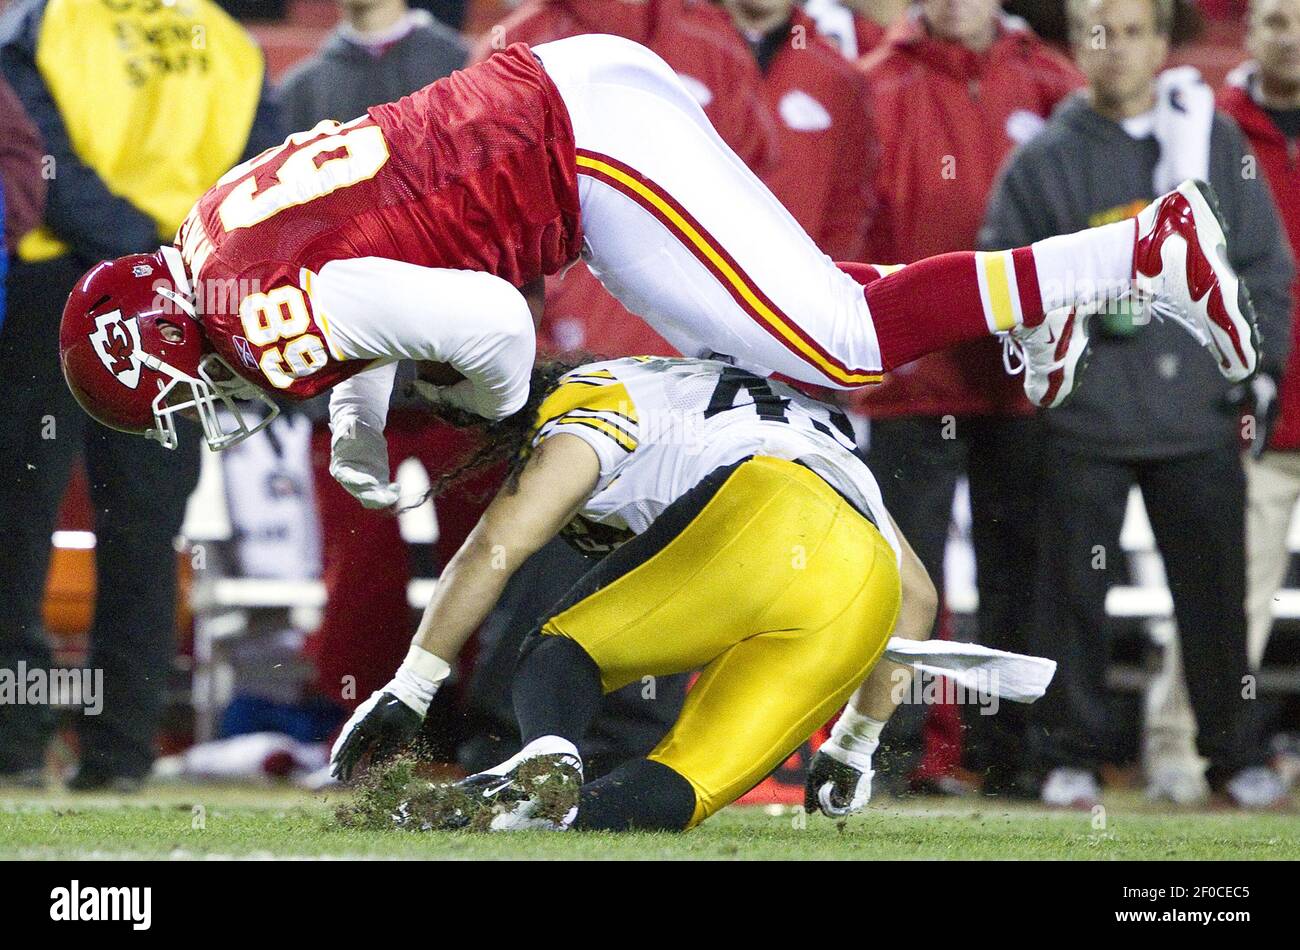 Kansas City Chiefs tackle Steve Maneri (68) is upended by Pittsburgh  Steelers strong safety Troy Polamalu (43) in the first quarter during  Sunday's football game on November 27, 2011 at Arrowhead Stadium